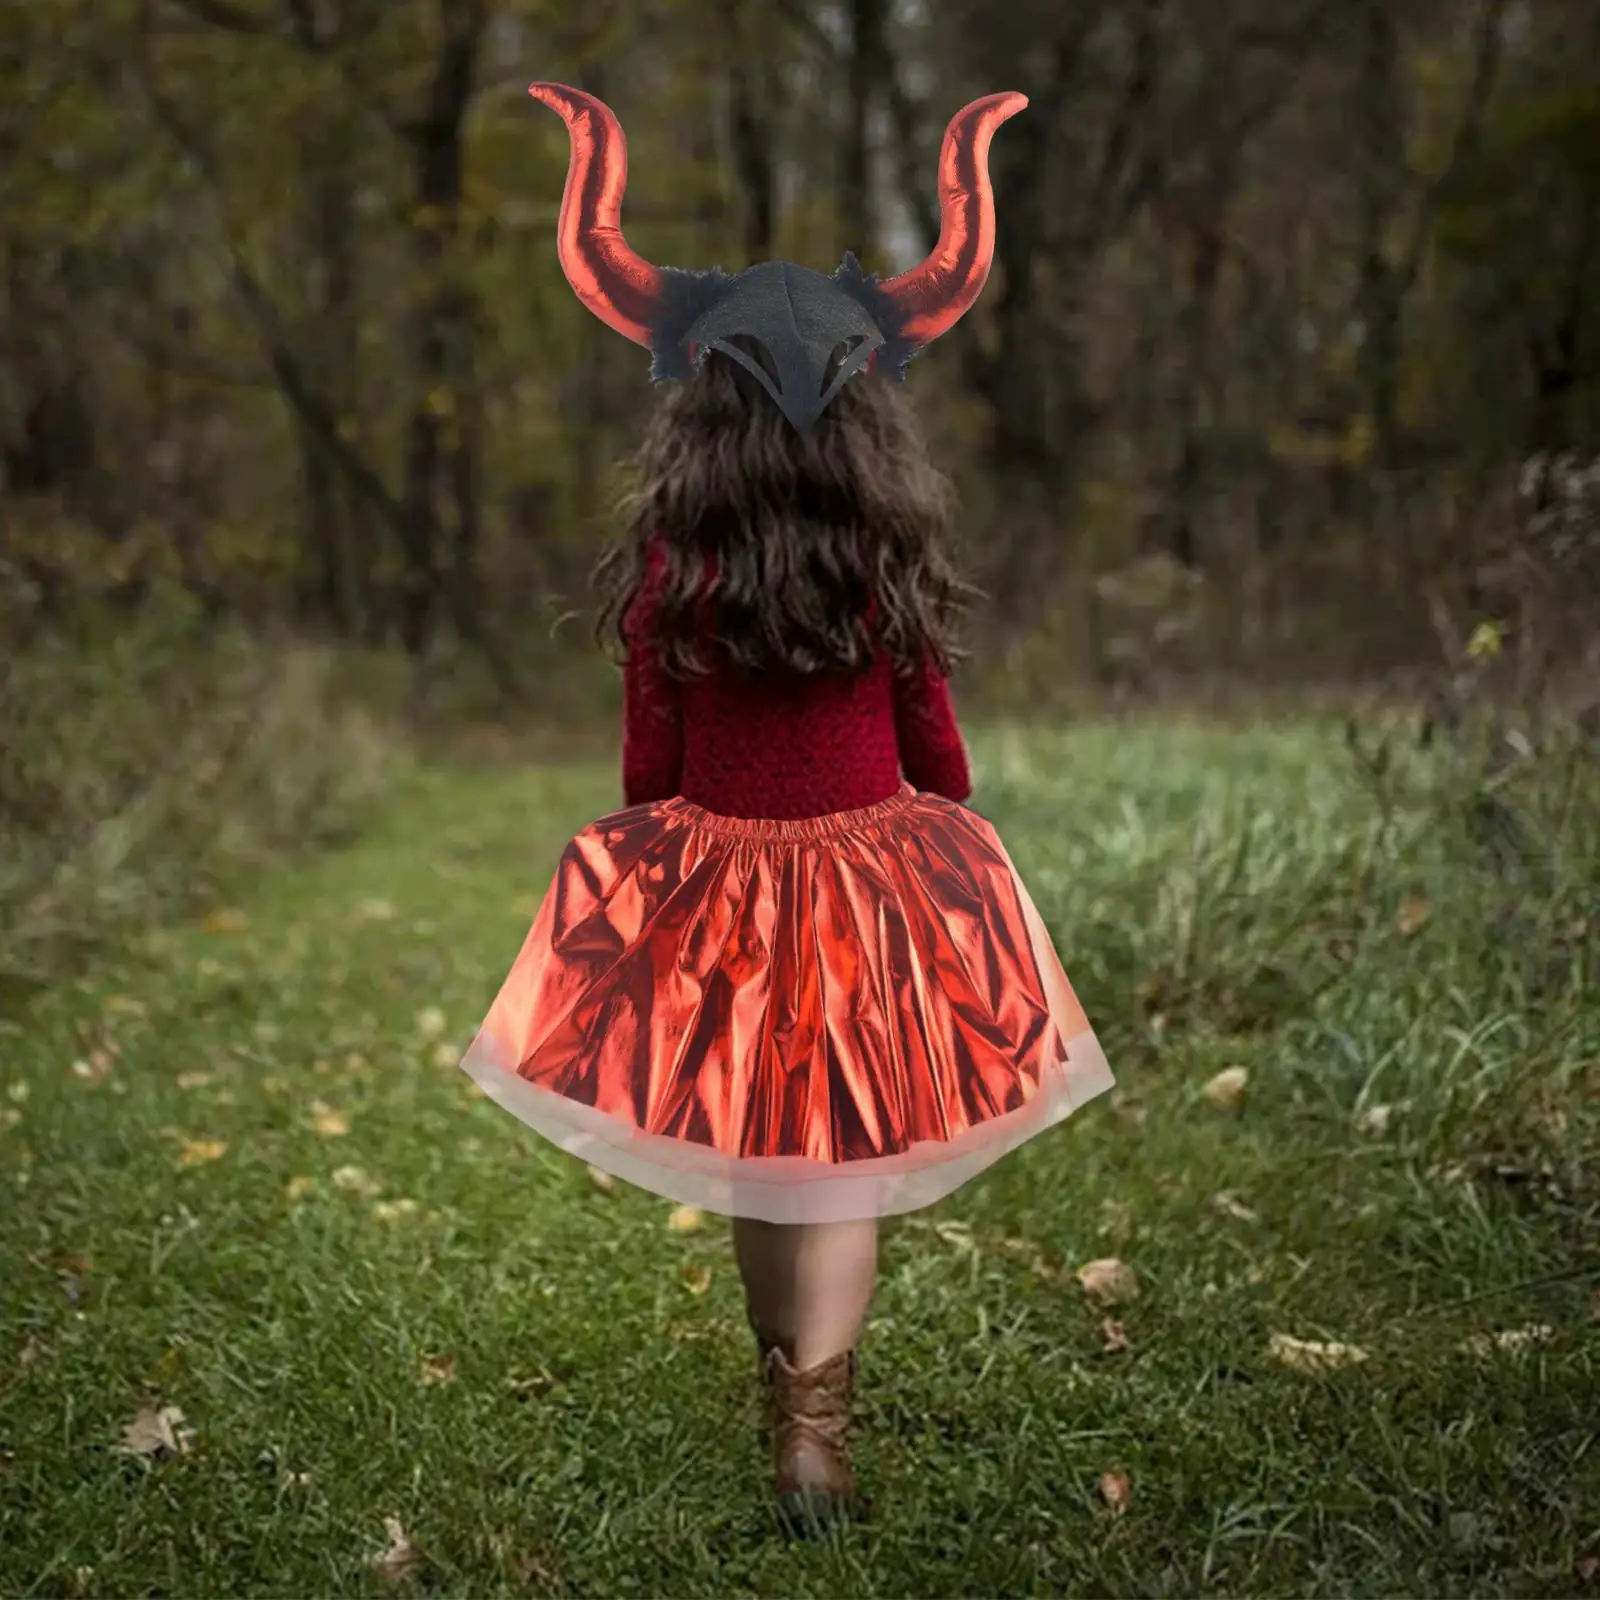 Halloween Devil Costume for Kids Imaginative Play Clothes Costume Decoration